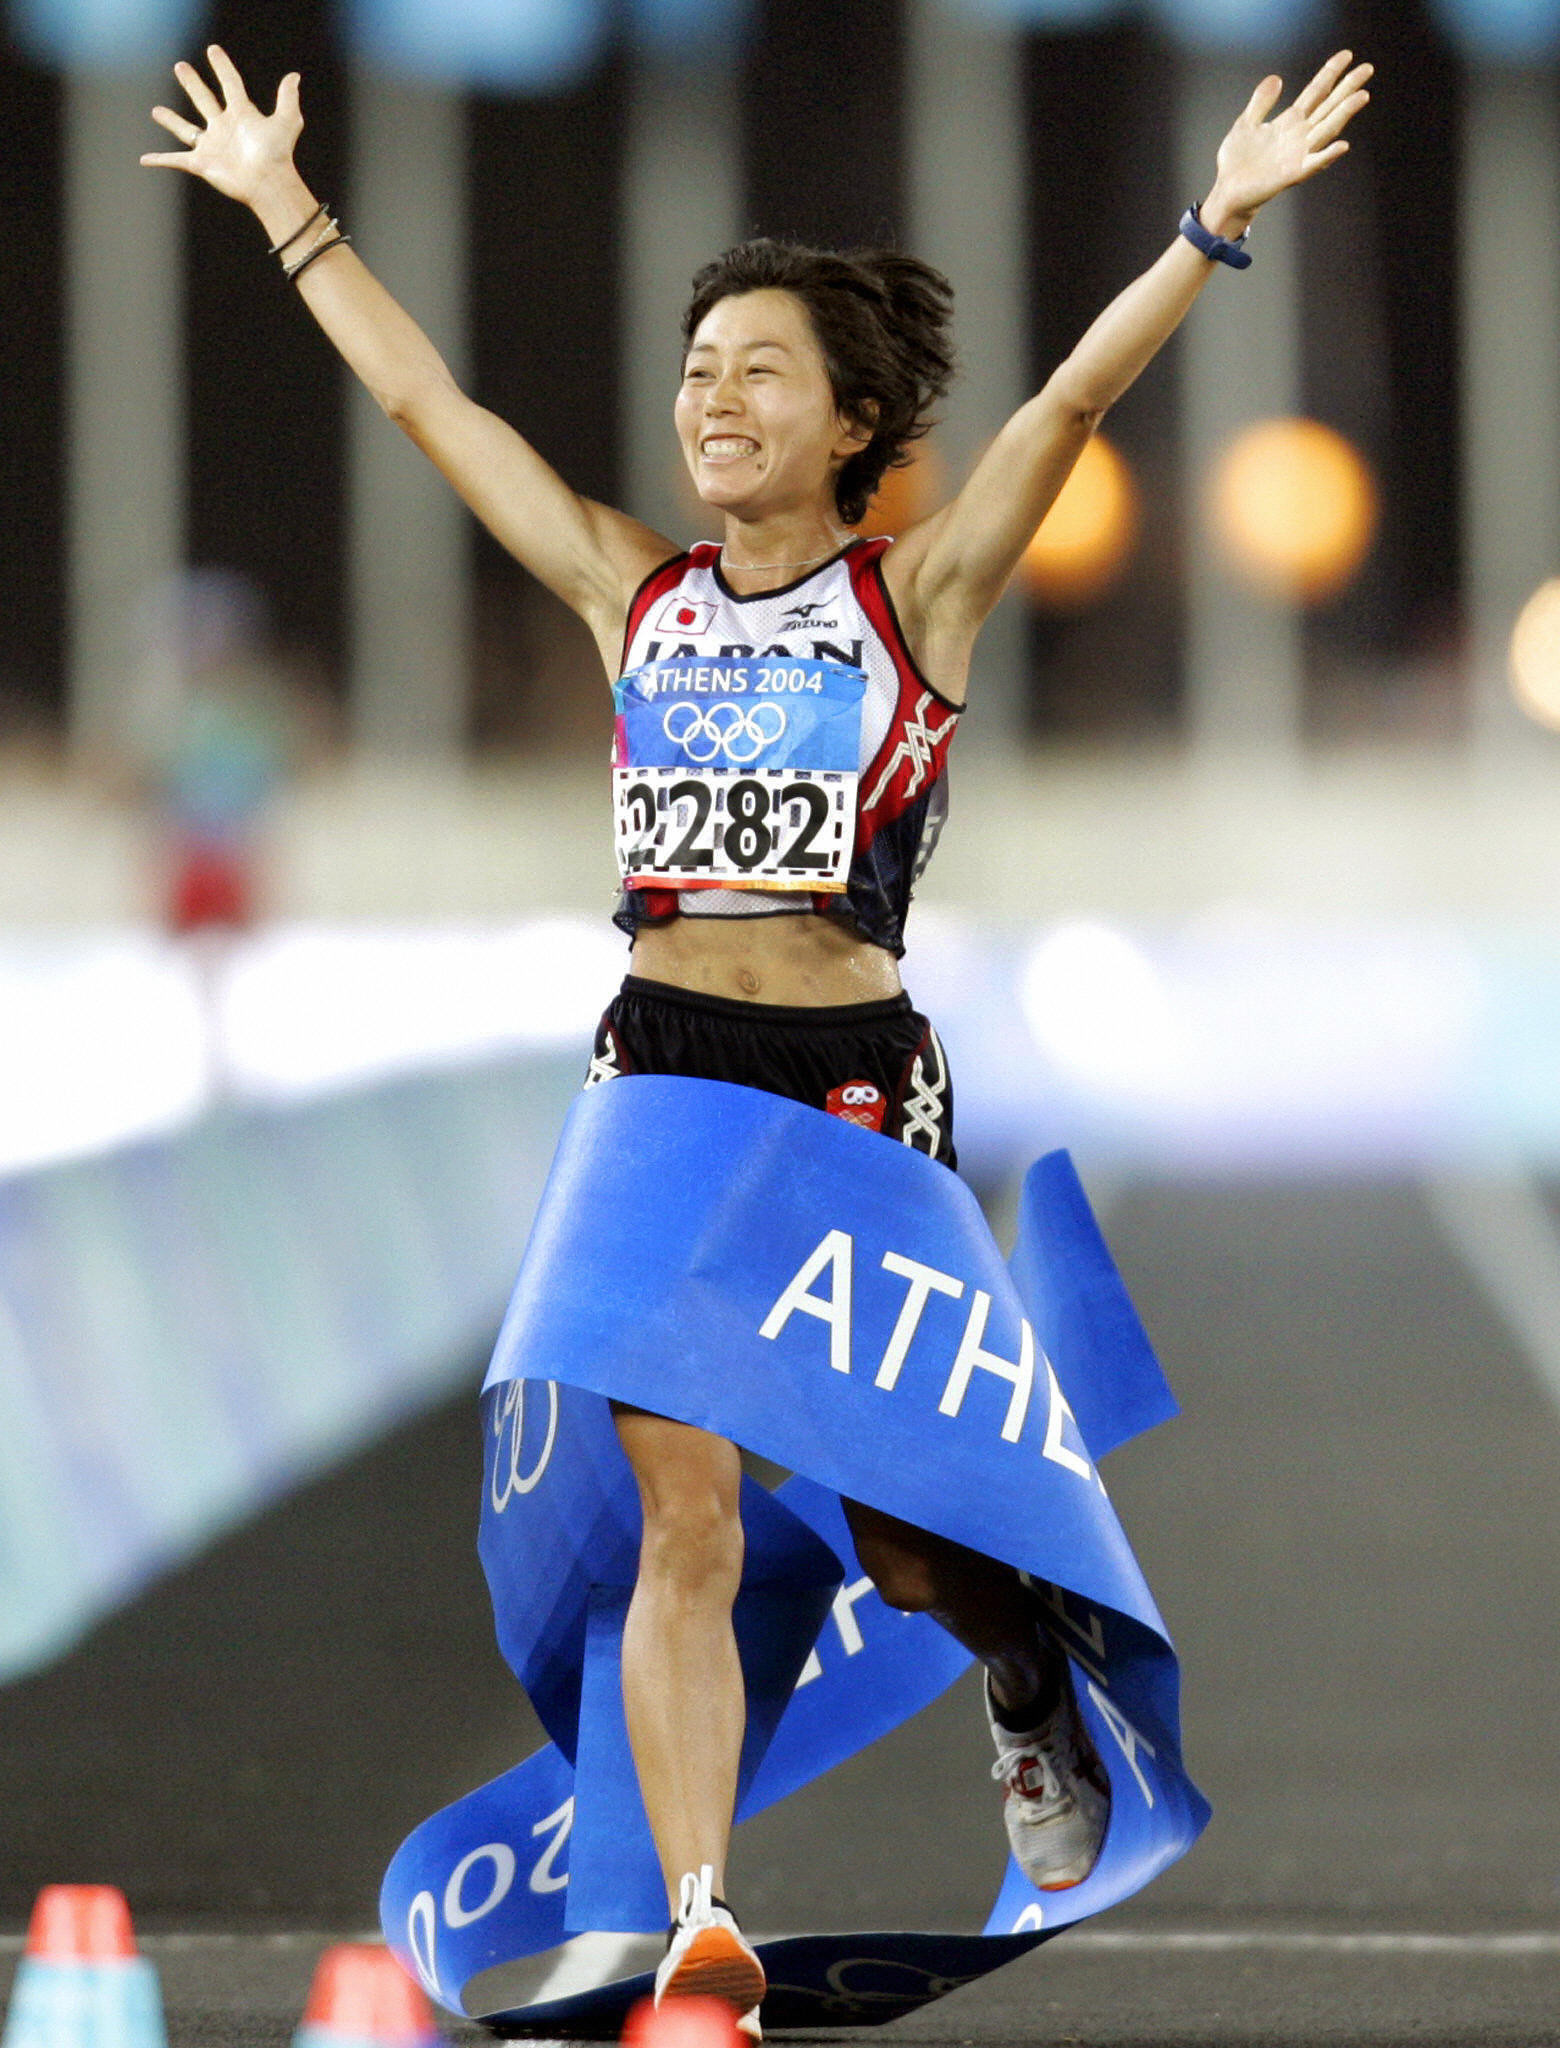 Japan's Mizuki Noguchi won the women's Olympic marathon at Athens 2004 in hot conditions ©Getty Images